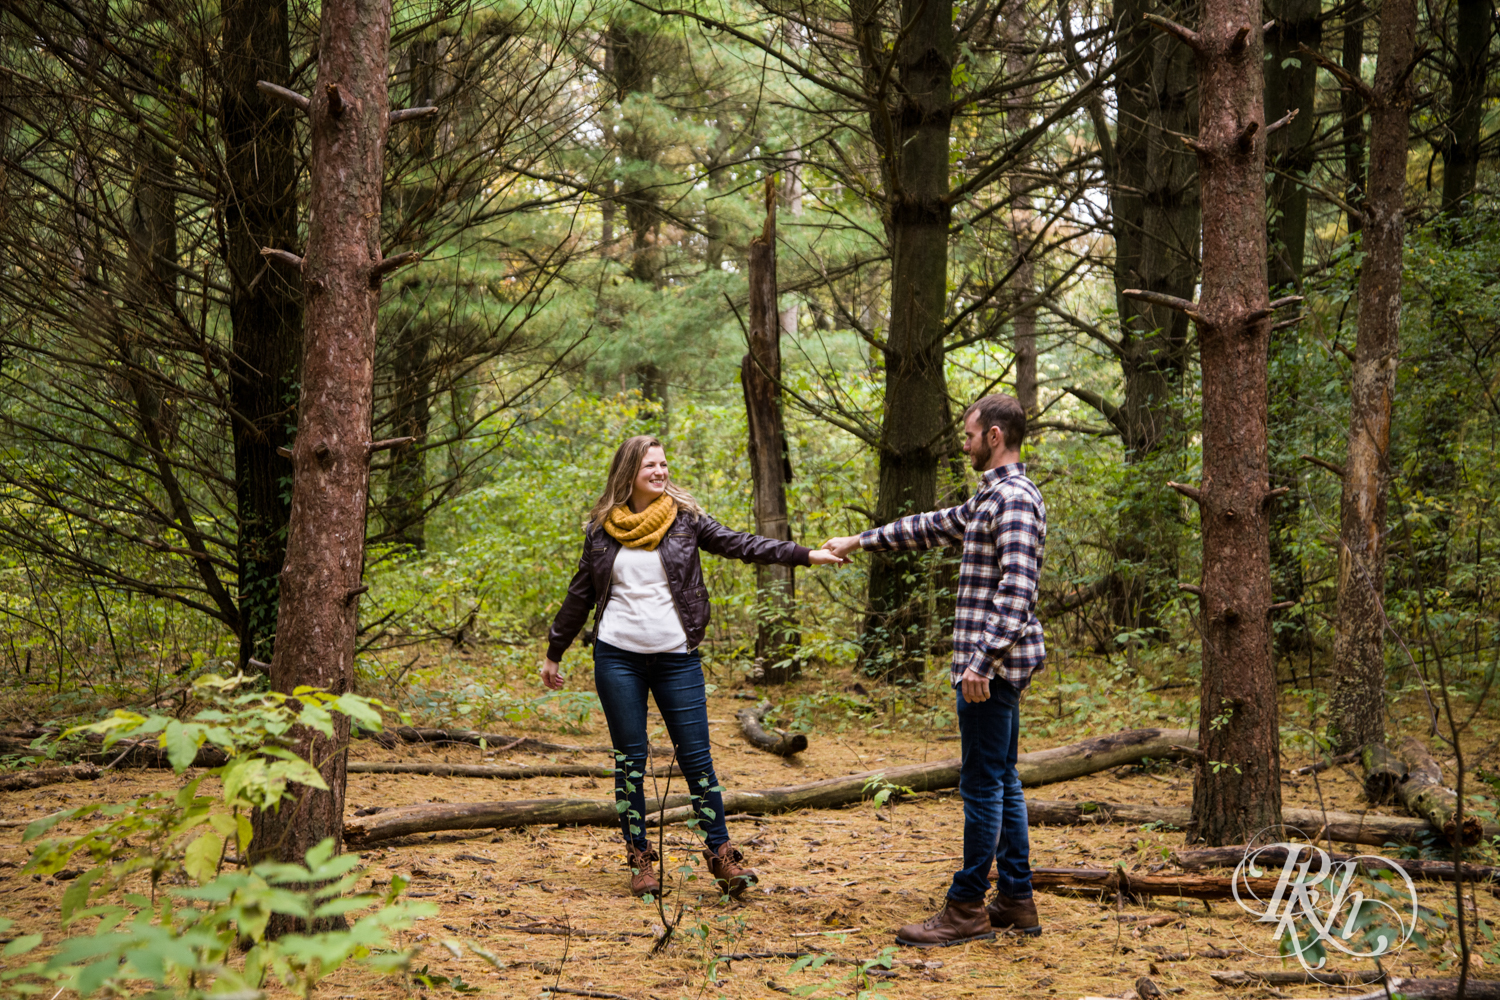 Man in flannel and woman in yellow scarf dance in woods at Lebanon Hills Regional Park in Eagan, Minnesota.